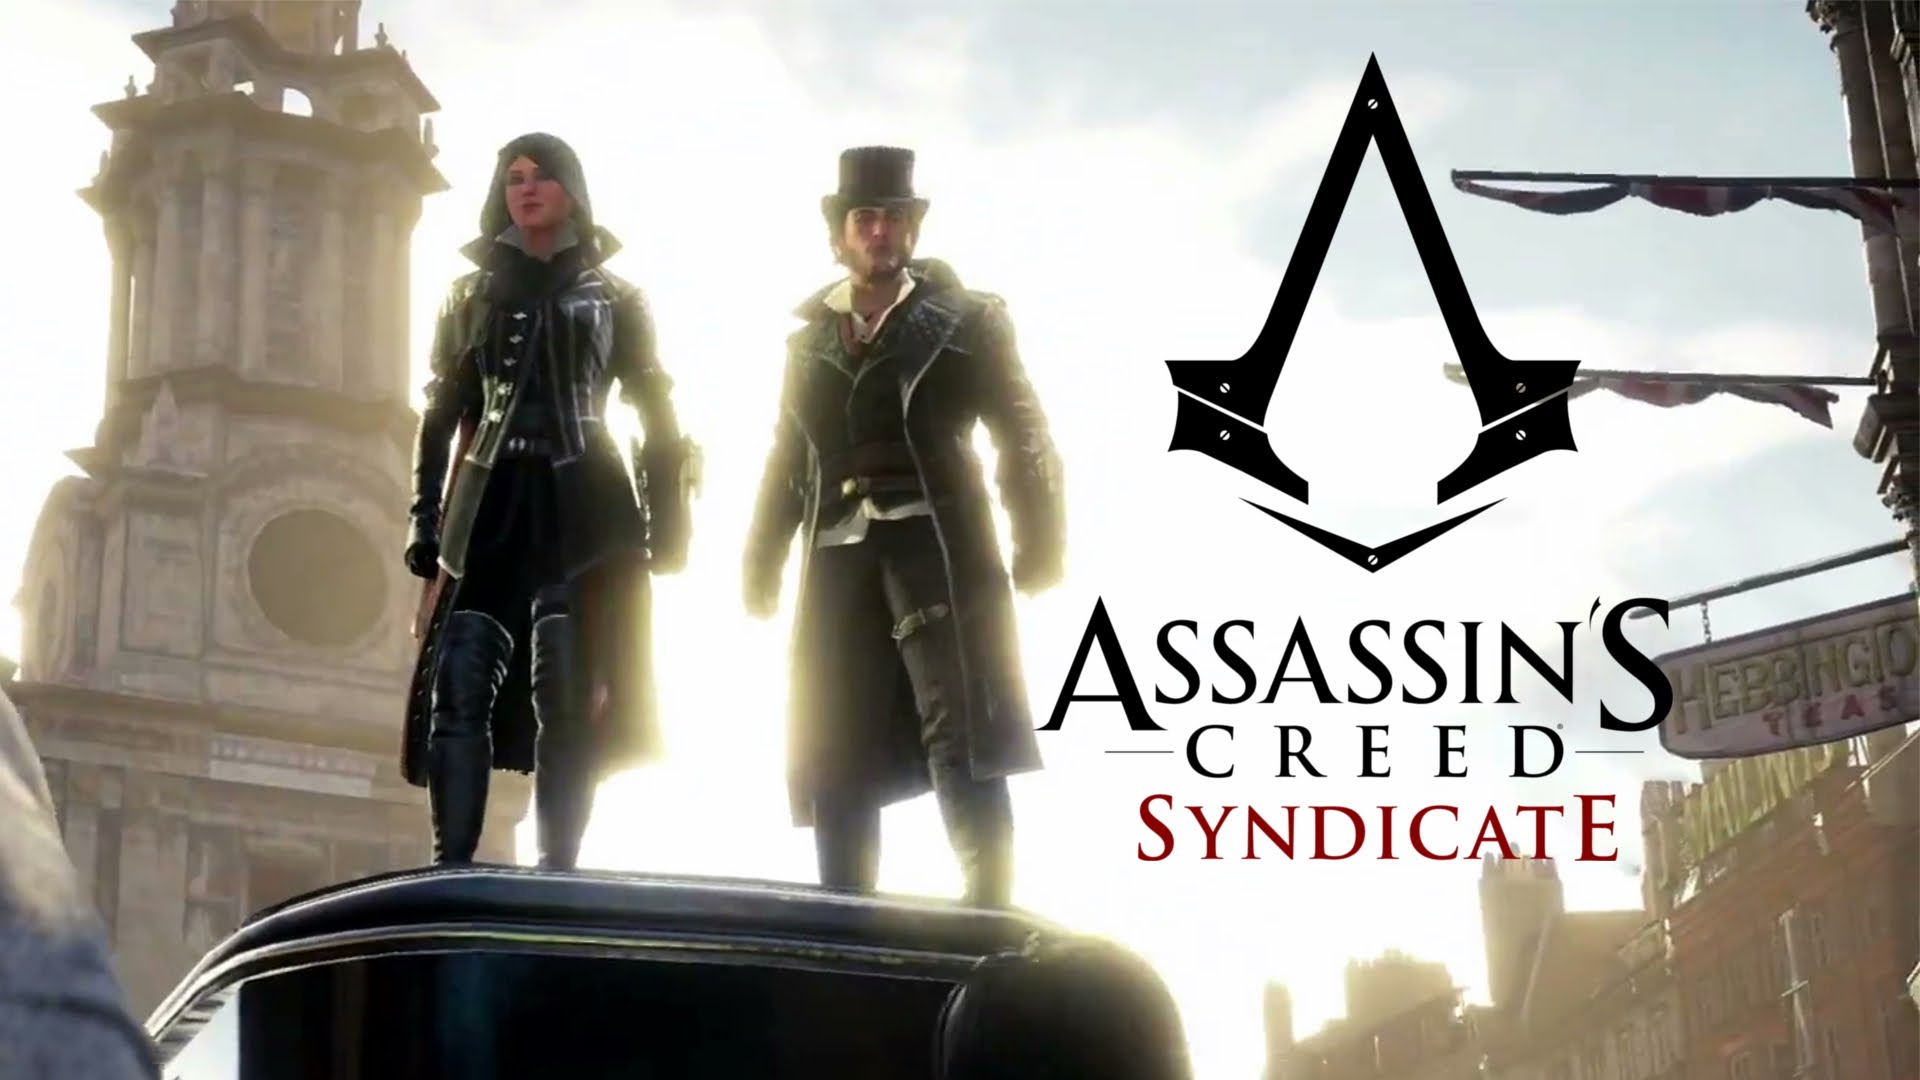 Assassin's Creed Syndicate logo